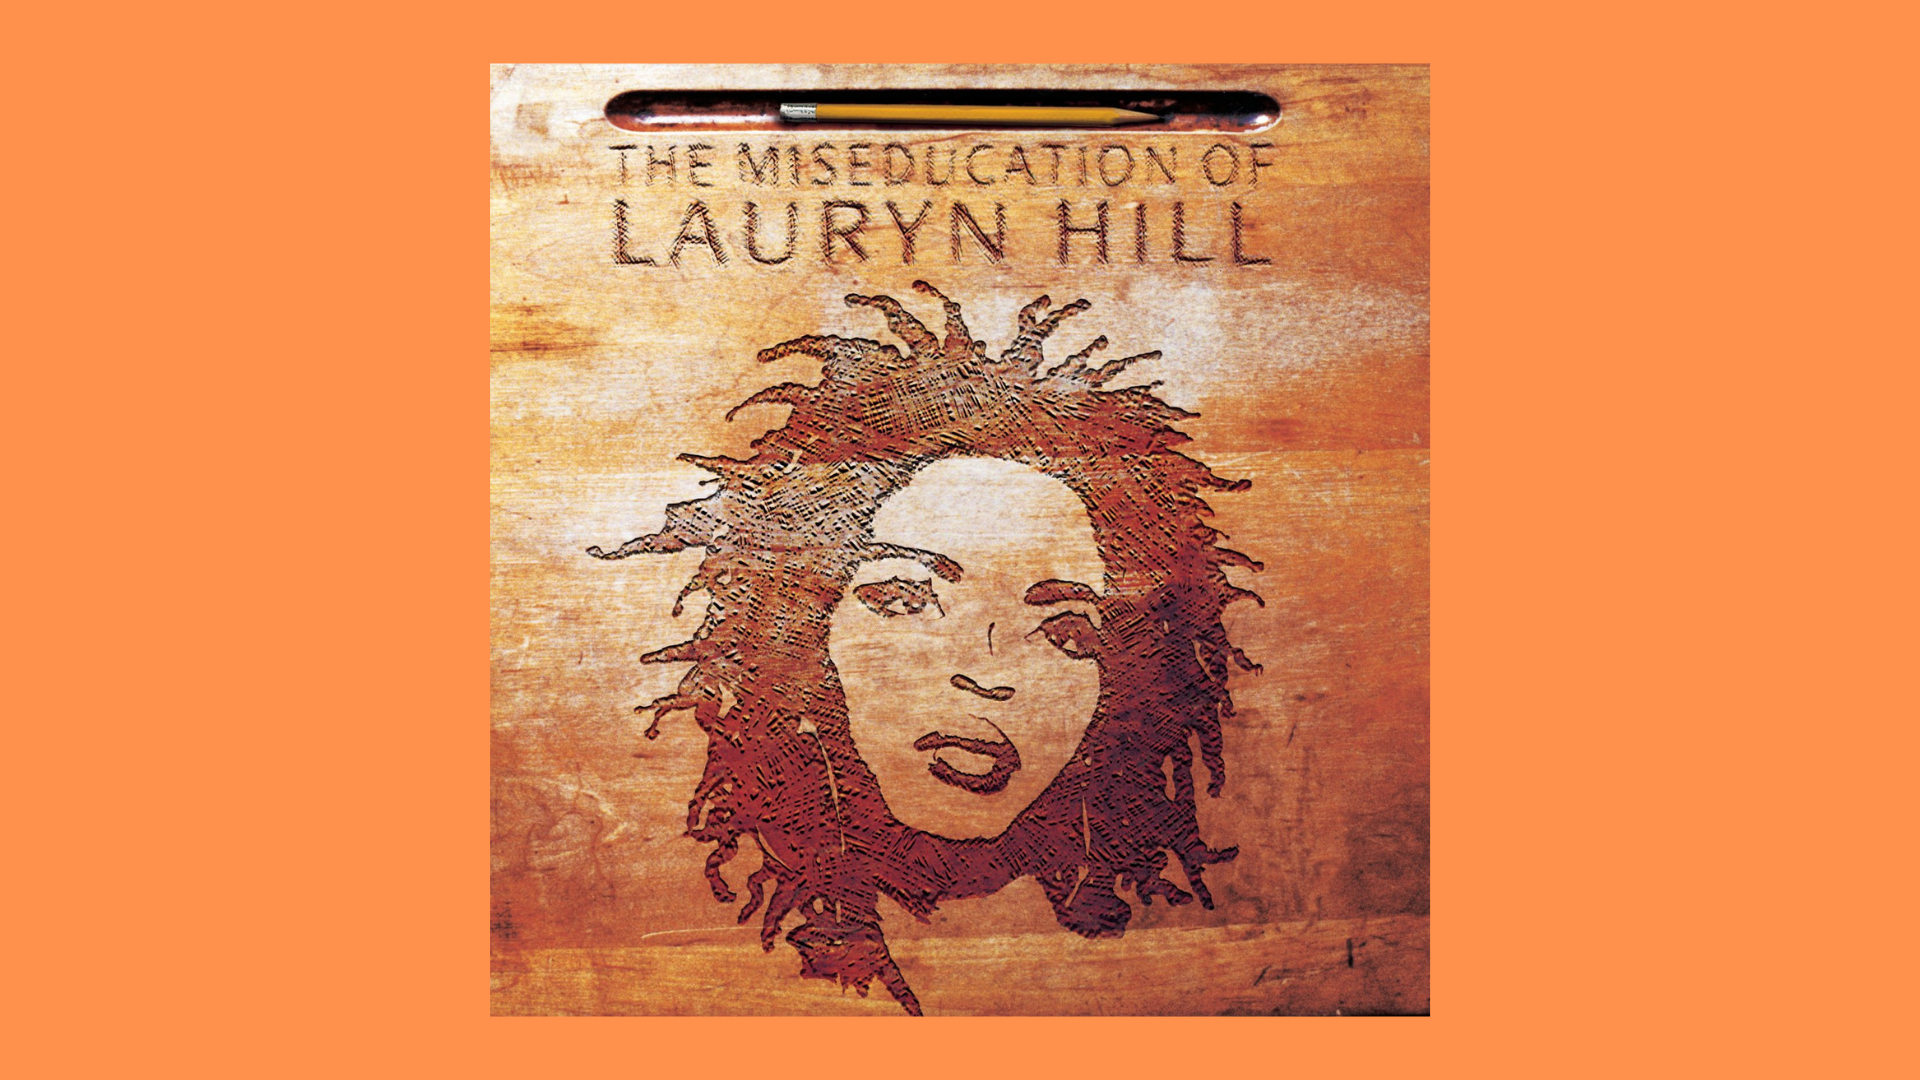 Feature / The Miseducation of Lauryn Hill: 20 years on.